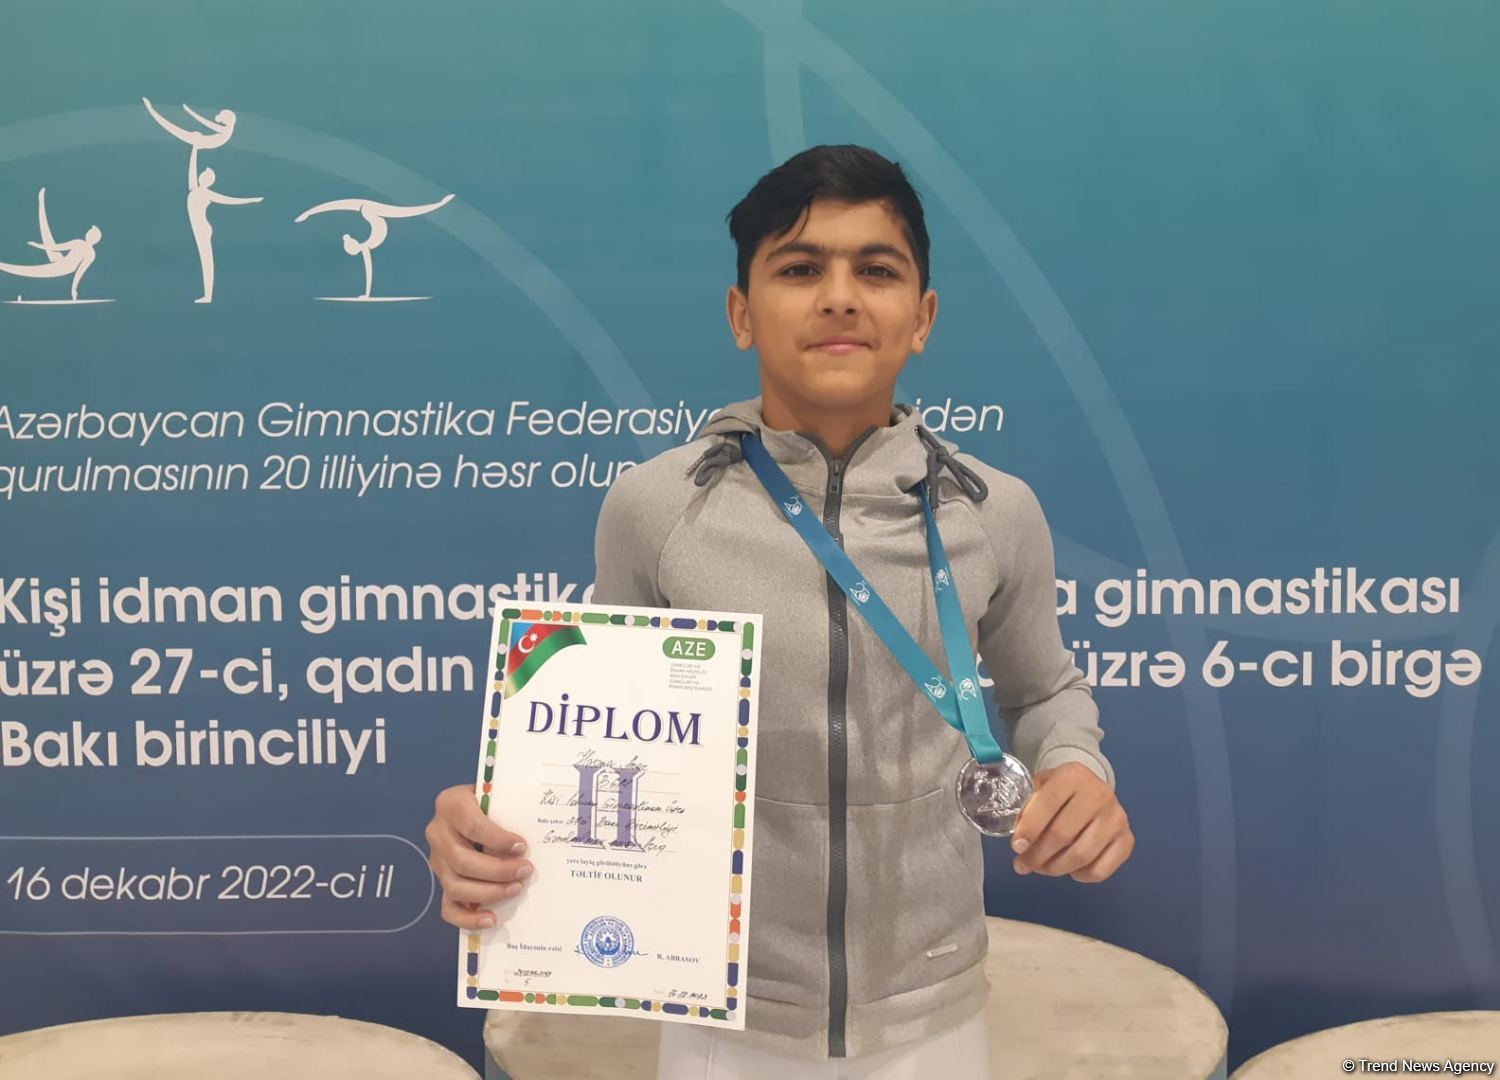 Participant of Joint Baku Championship expresses satisfaction over winning silver medal